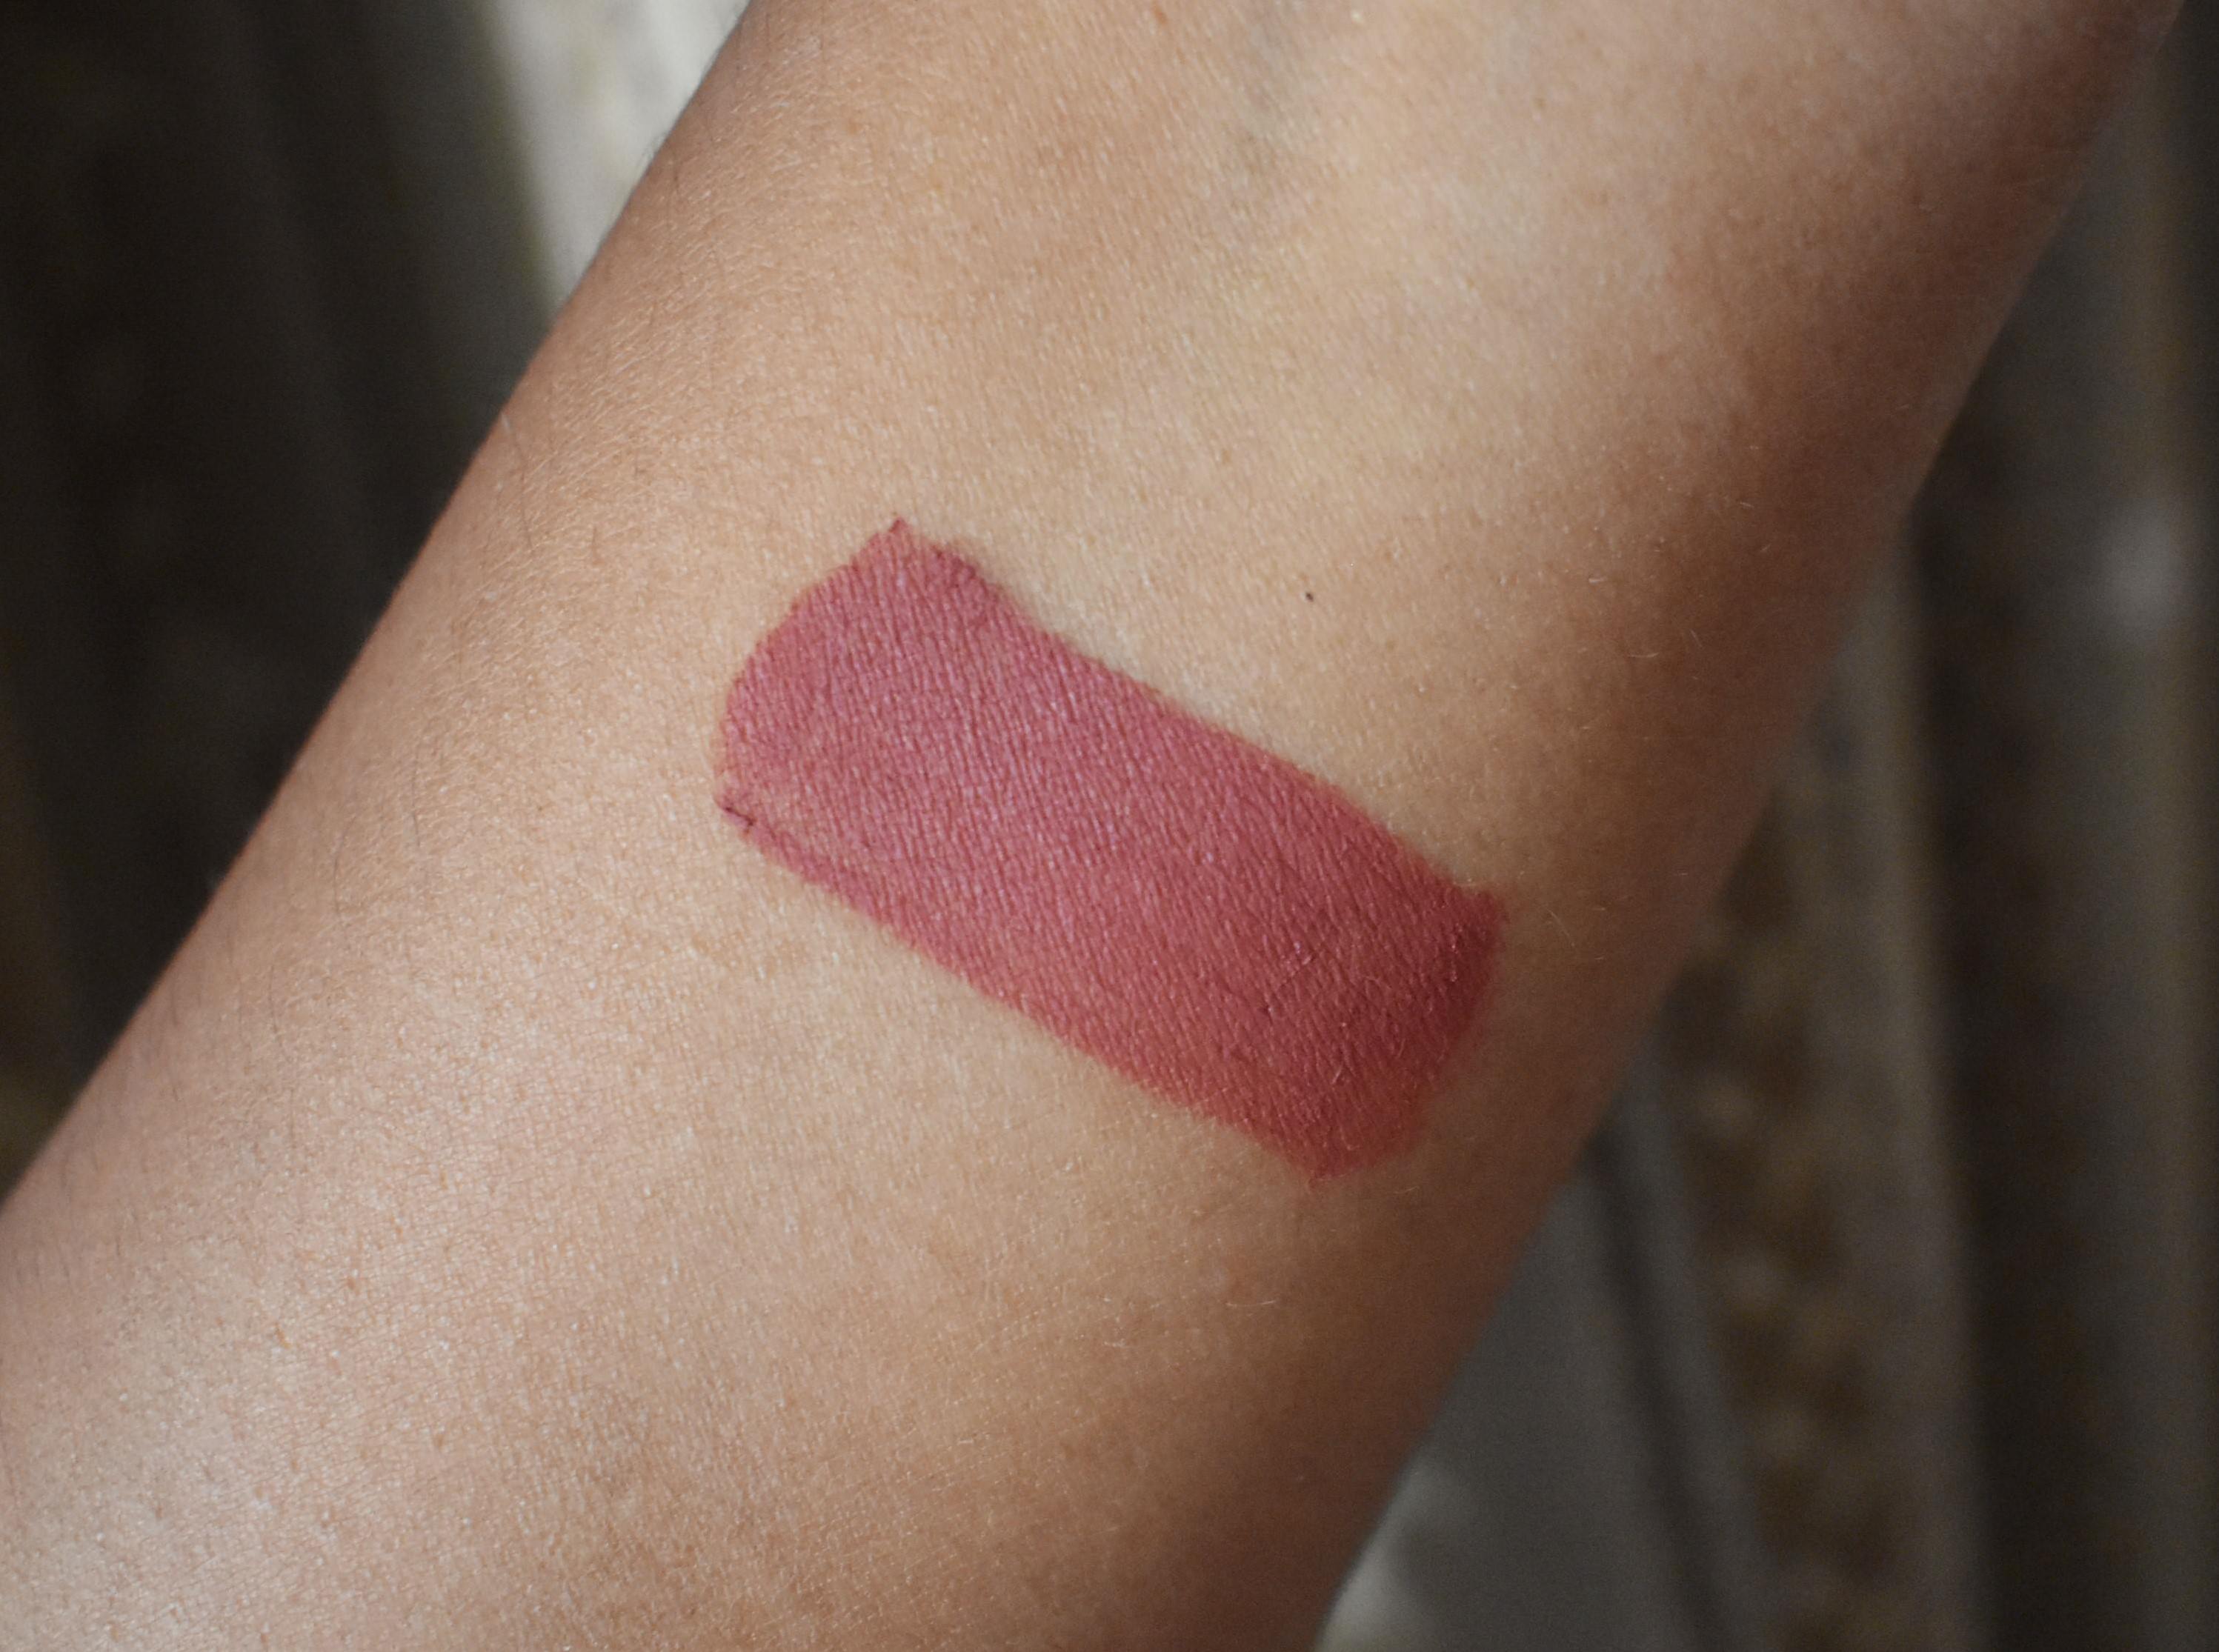 Wet n Wild Liquid Lipstick Give Me Mocha Review Swatches